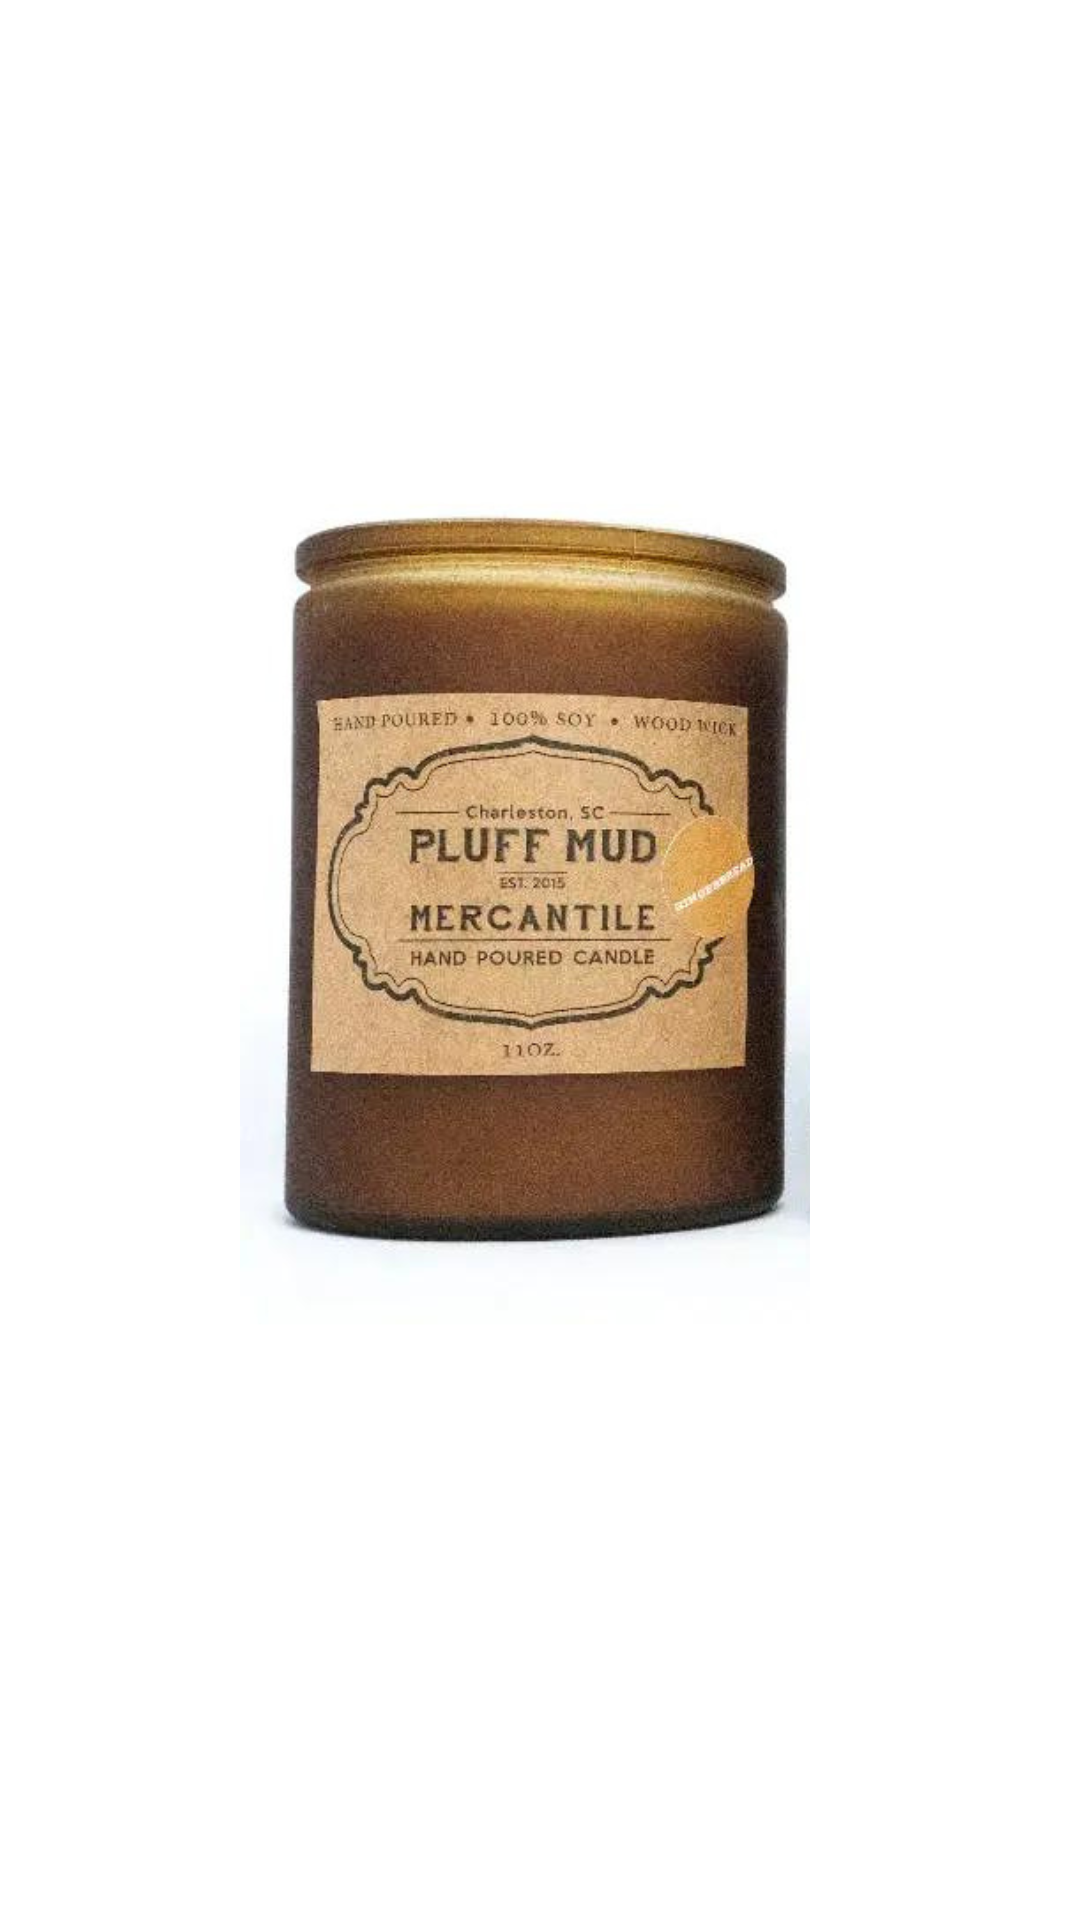 Up The Creek Hand Poured Soy Candle - Pluff Mud Mercantile